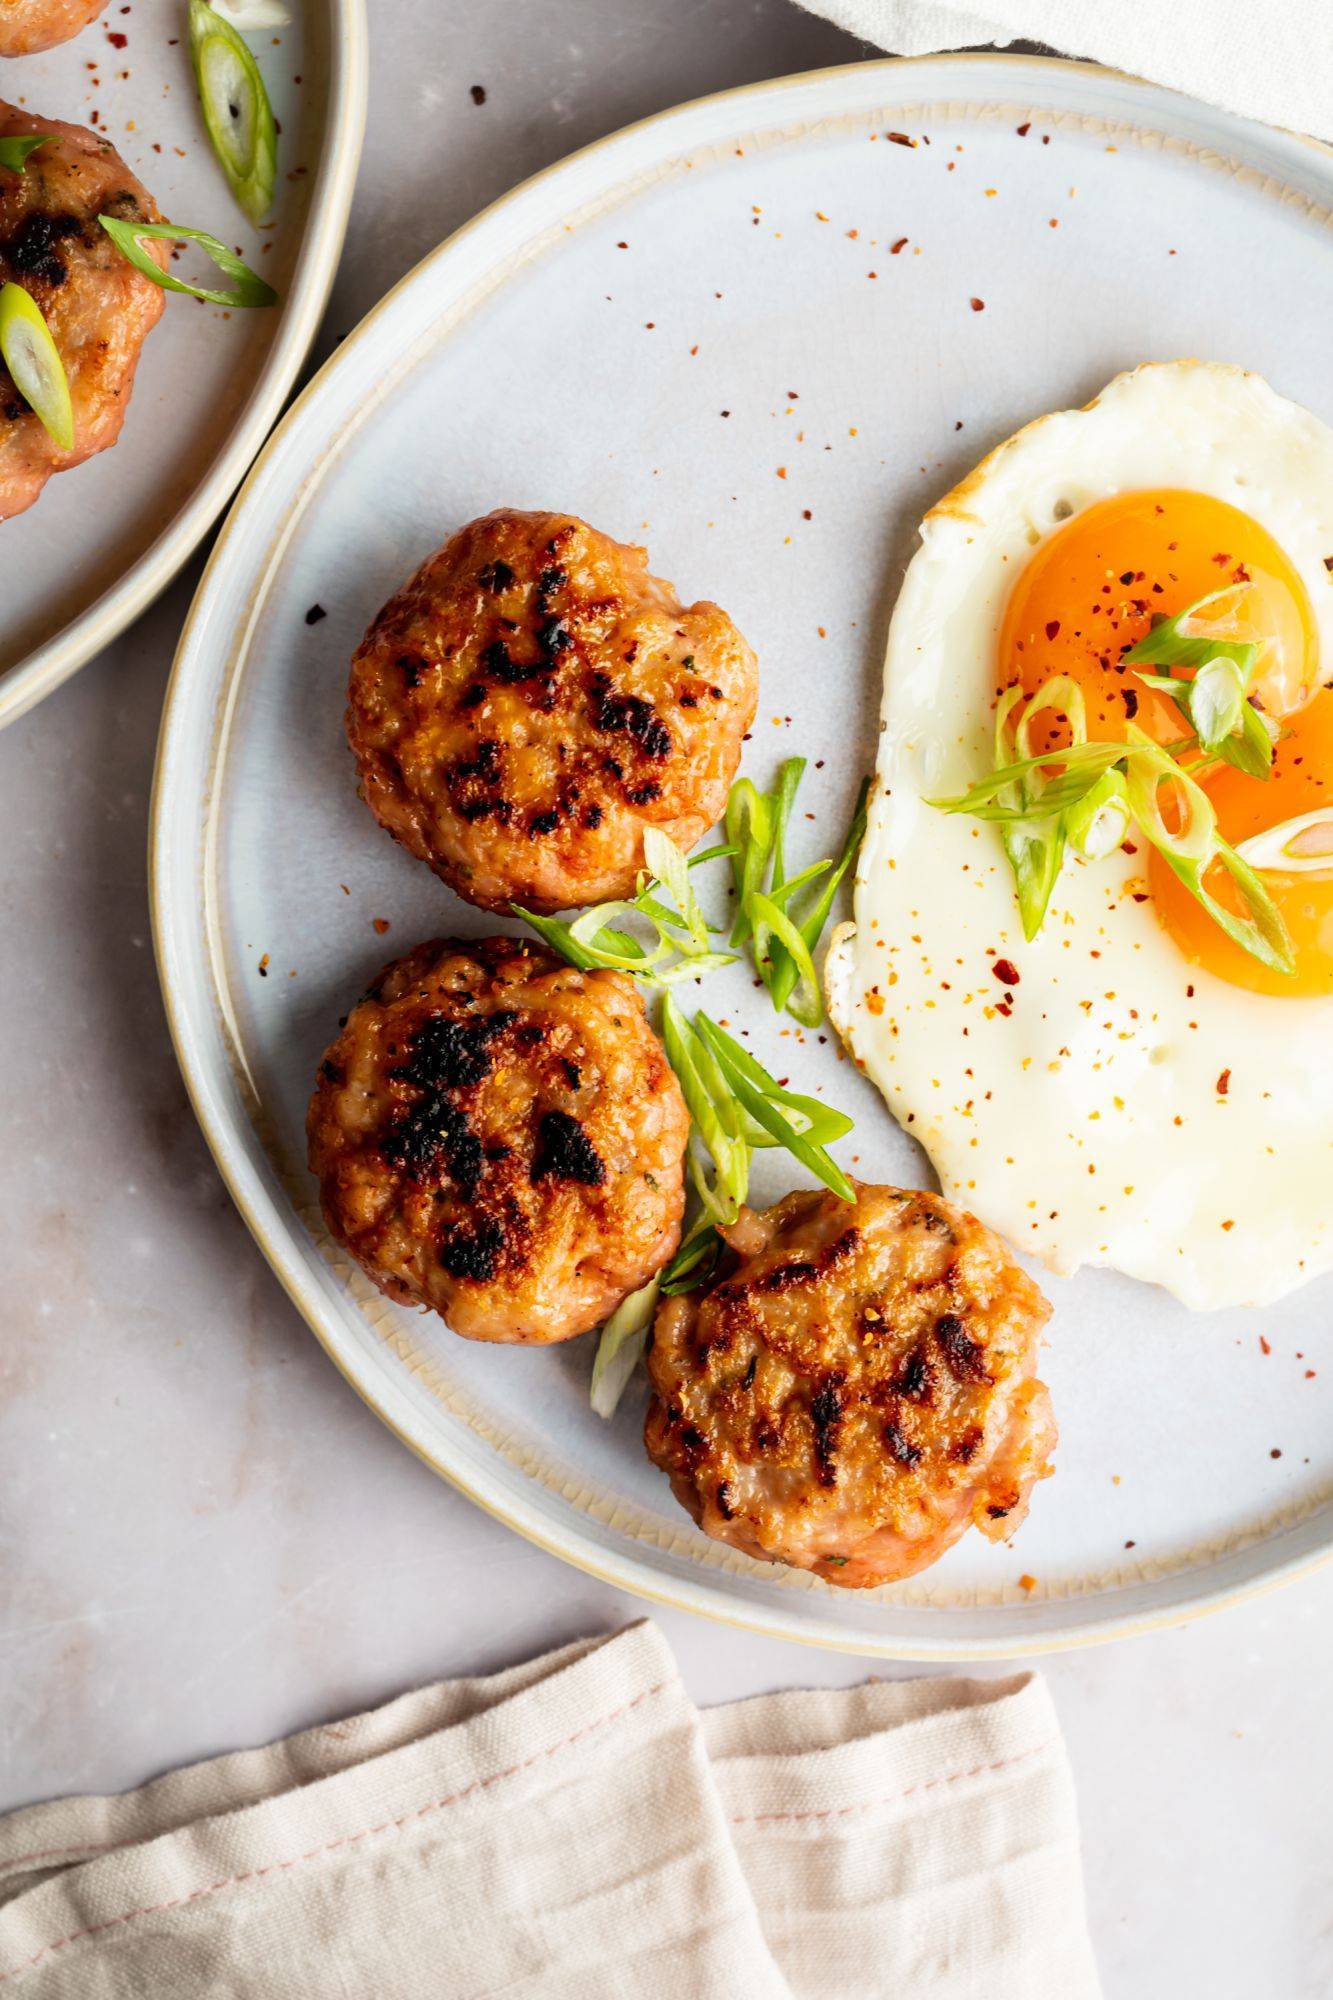 Chicken sausage breakfast patties served with a sunny side up egg and green onions.